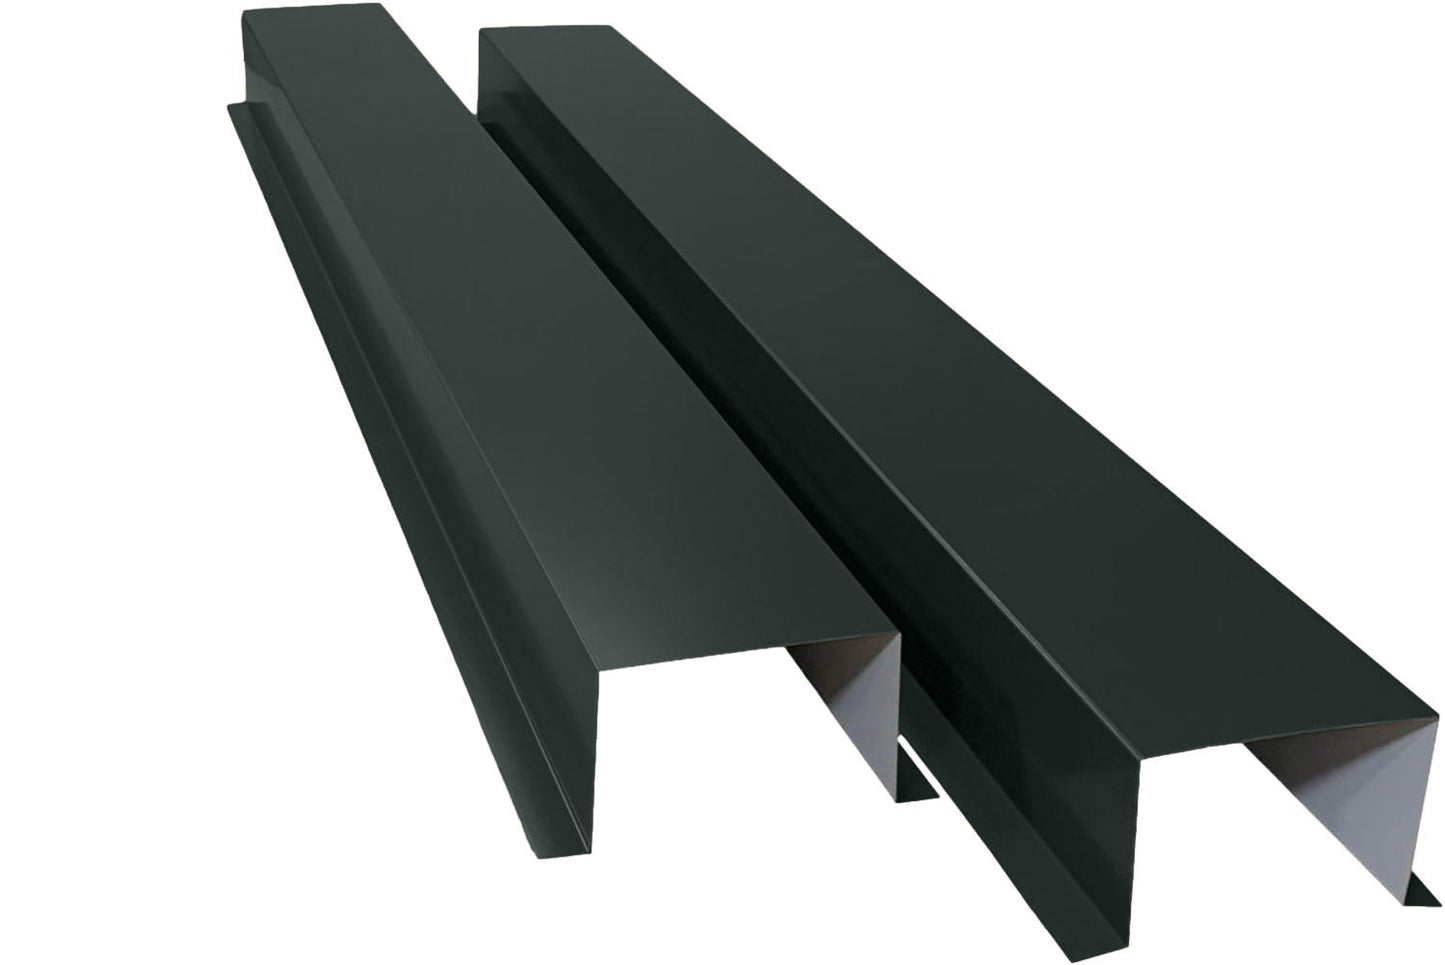 Two dark-colored, L-shaped metal flashing pieces made from Commercial Series - 24 Gauge Painted Metal HVAC Line Set Covers - Heavy Duty, Multiple Sizes & Colors by Perma Cover are positioned parallel to each other. The smooth surface and sharp, clean edges give them a sleek and modern appearance, perfect for HVAC line protection in commercial settings.